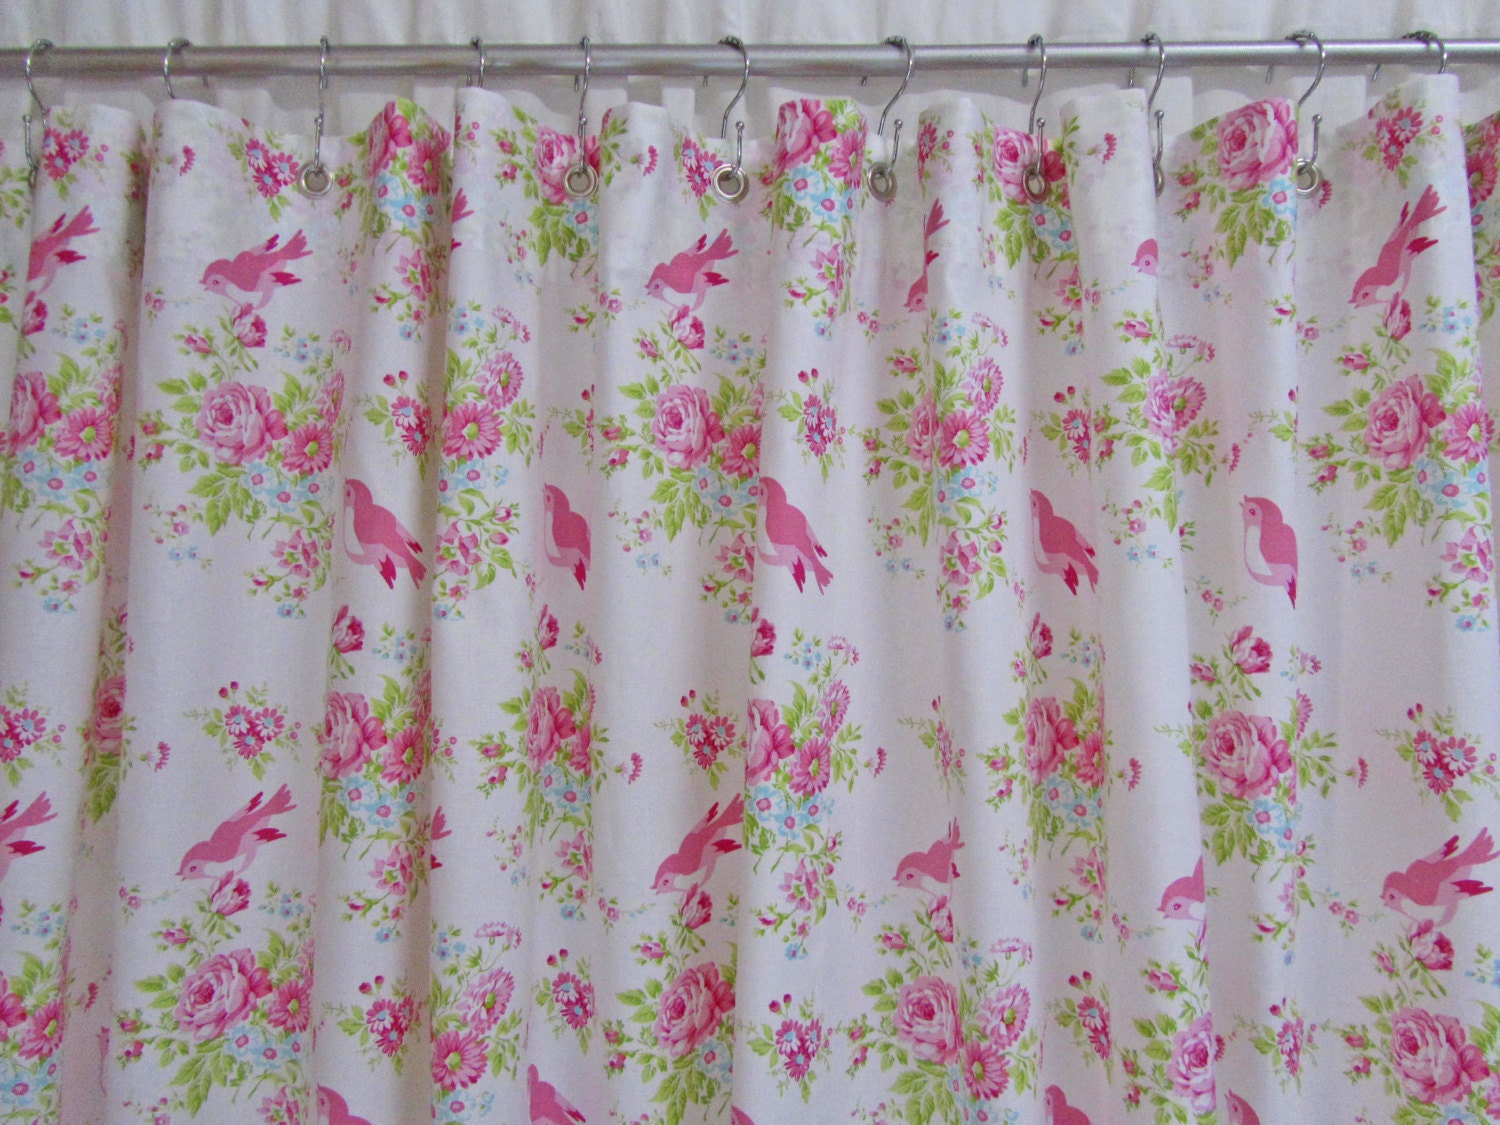 Cottage Chic Shower Curtain Shabby Chic Decor Rose Shower